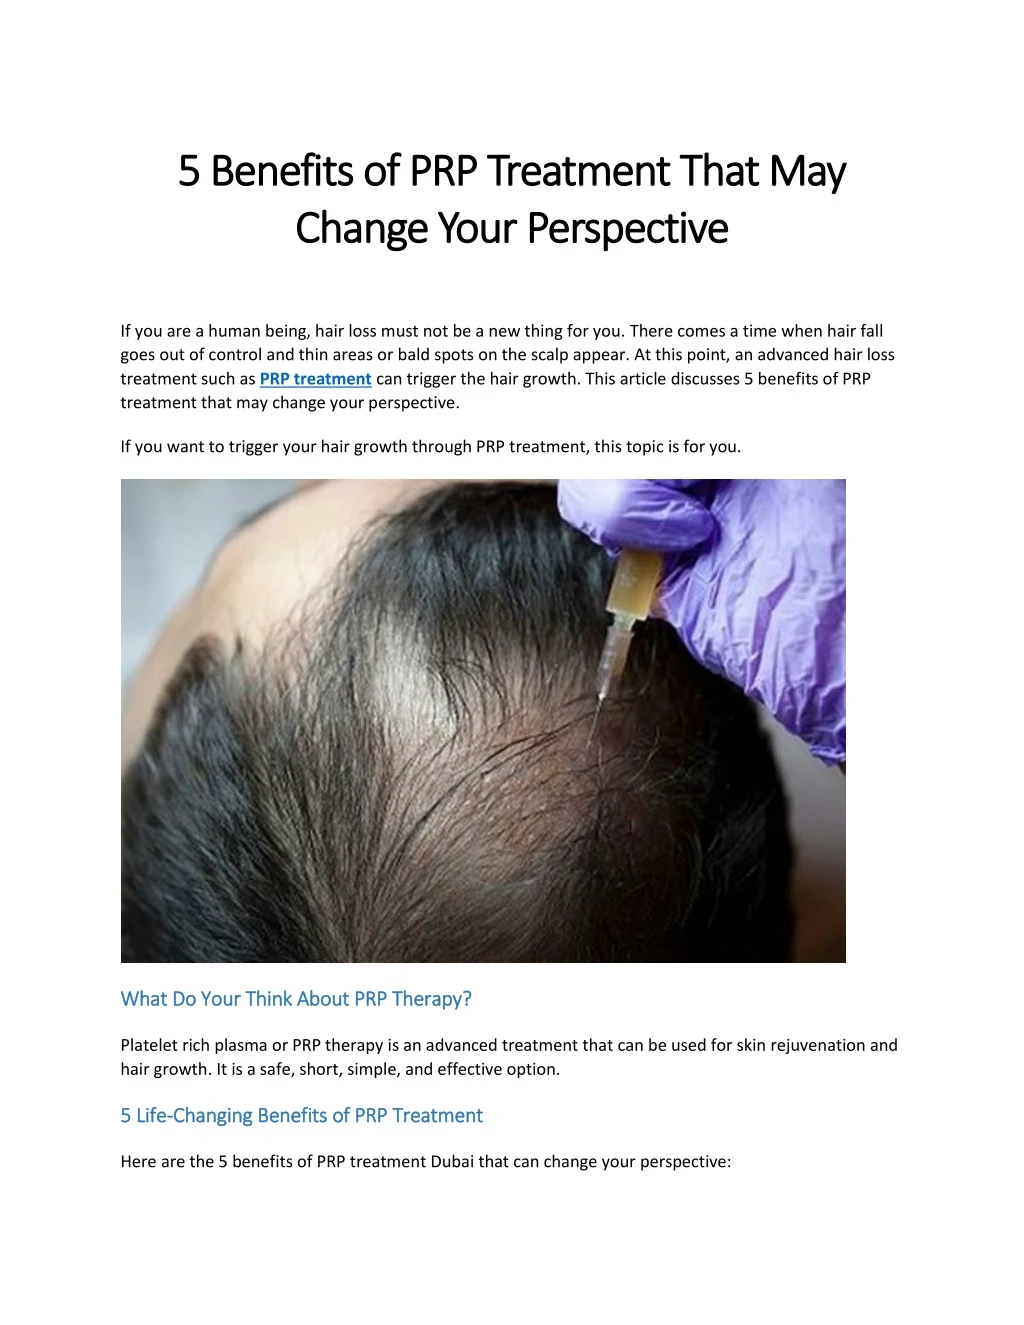 5 benefits 5 benefits of of prp treatment that